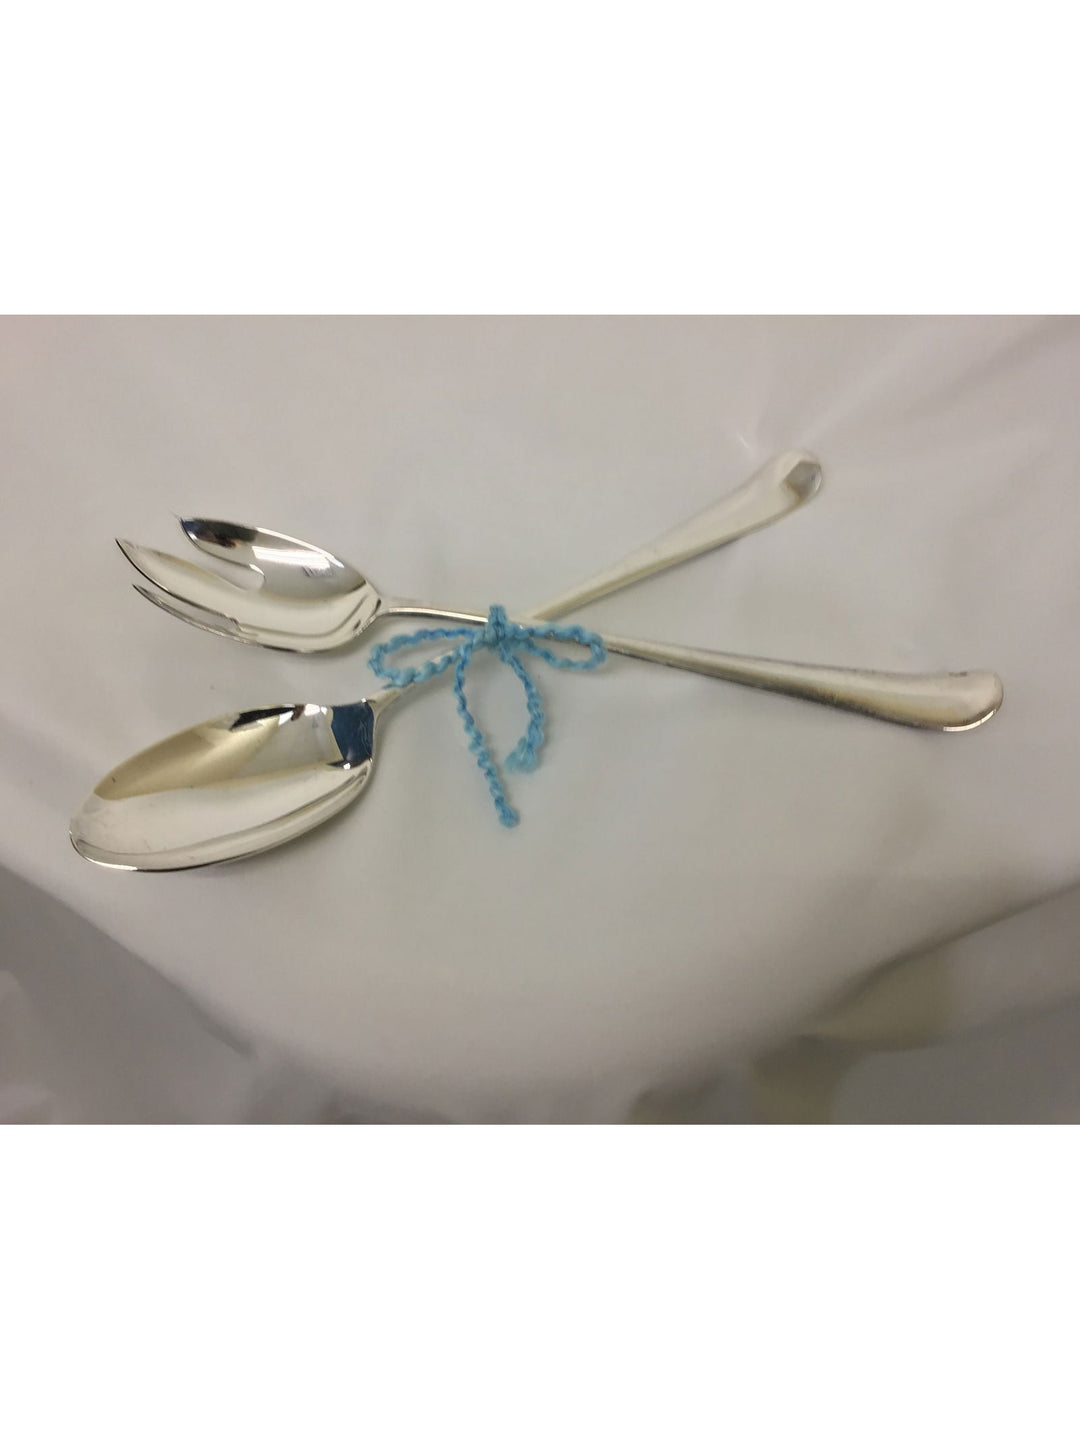 SG England Silverplated Large Salad Serving Set Spoon & Fork - The Kennedy Collective Thrift - 